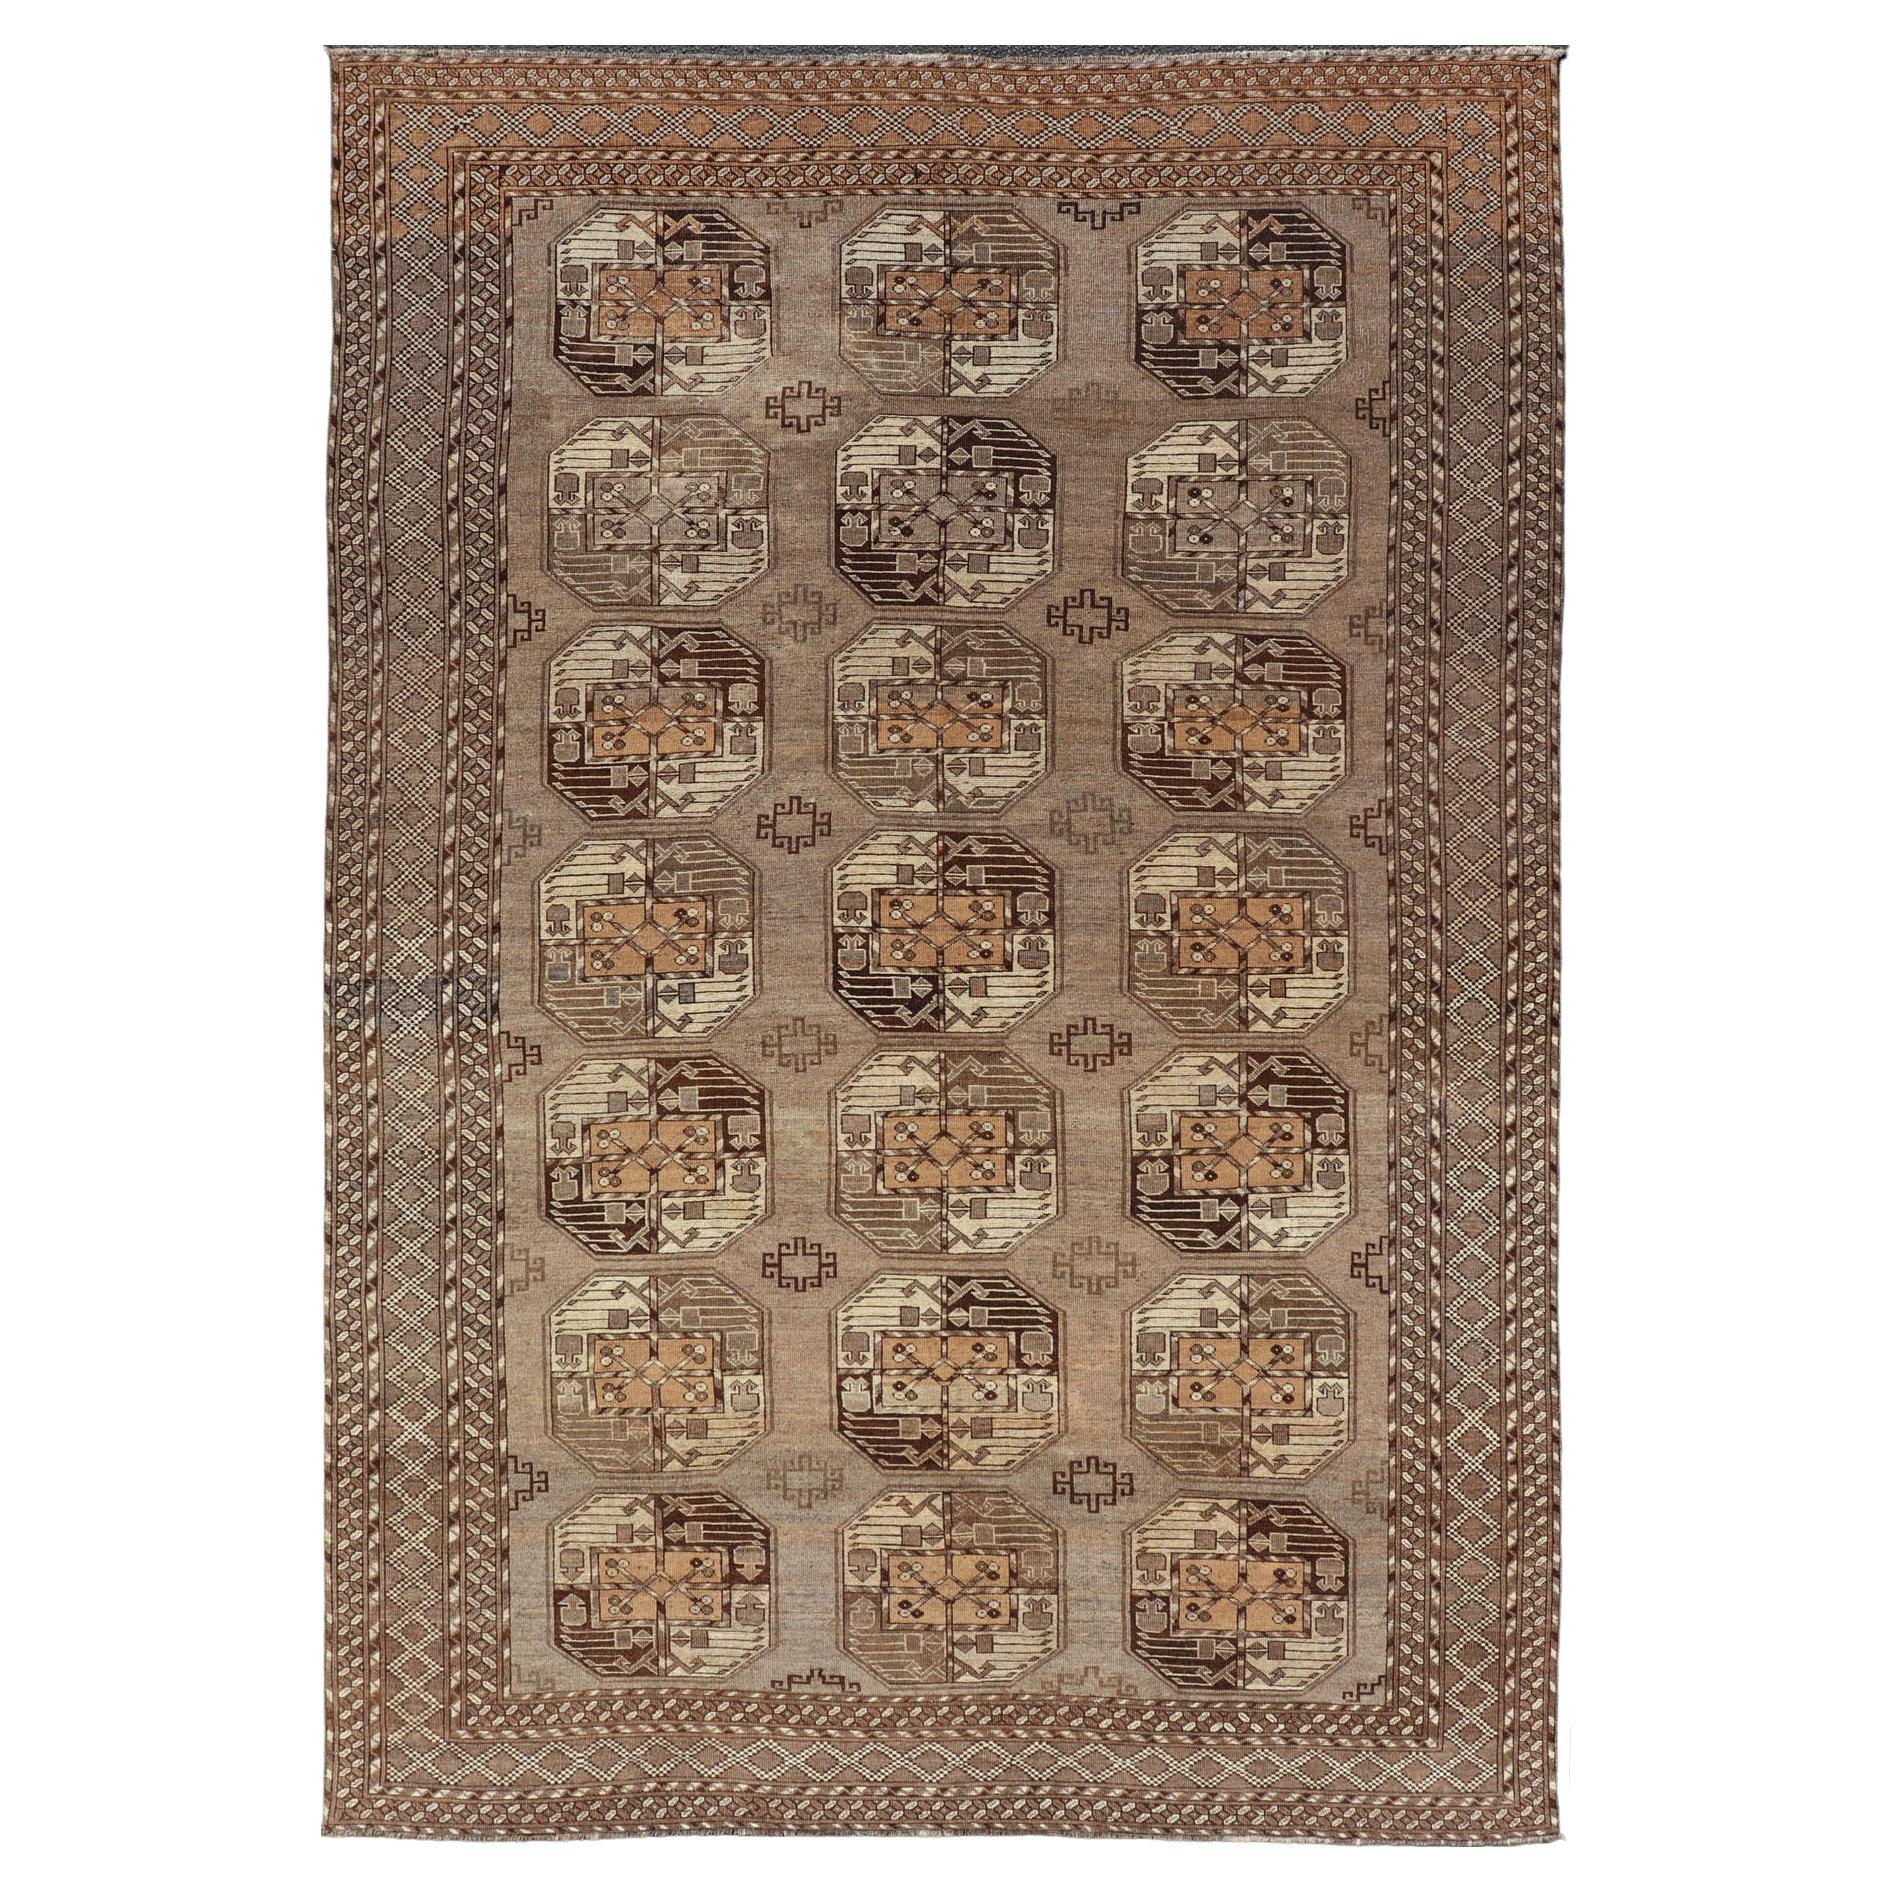 Hand-Knotted Vintage Ersari Rug with Gul Design in Brown, Ivory  & Almond